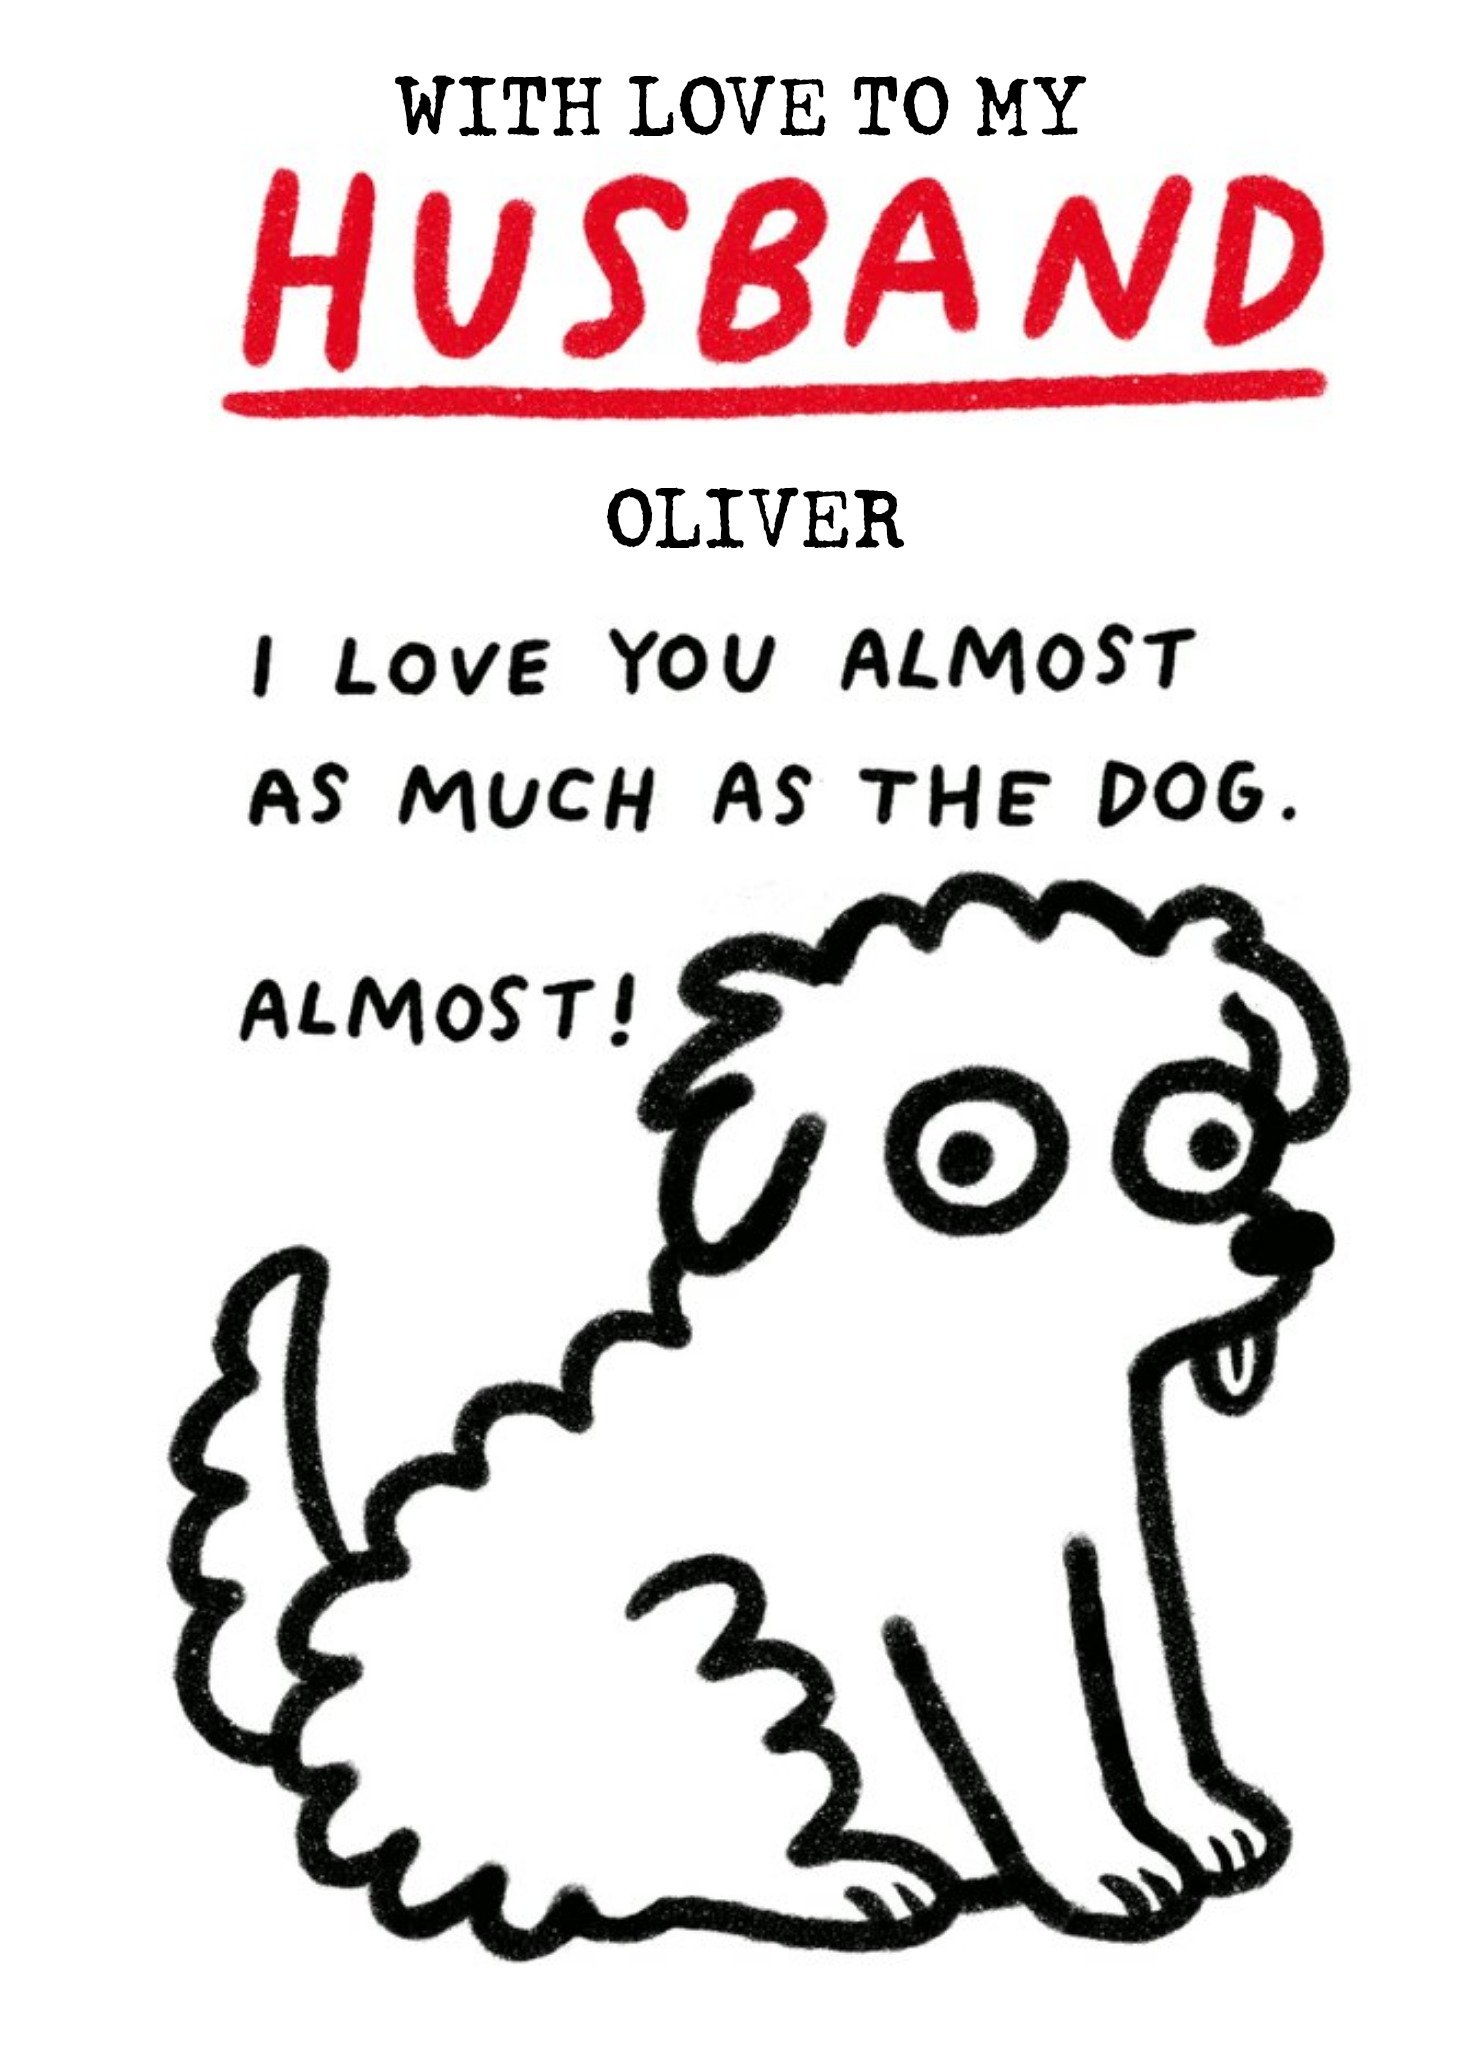 Moonpig Quirky Illustration Of A Dog Husband's Humorous Birthday Card, Large